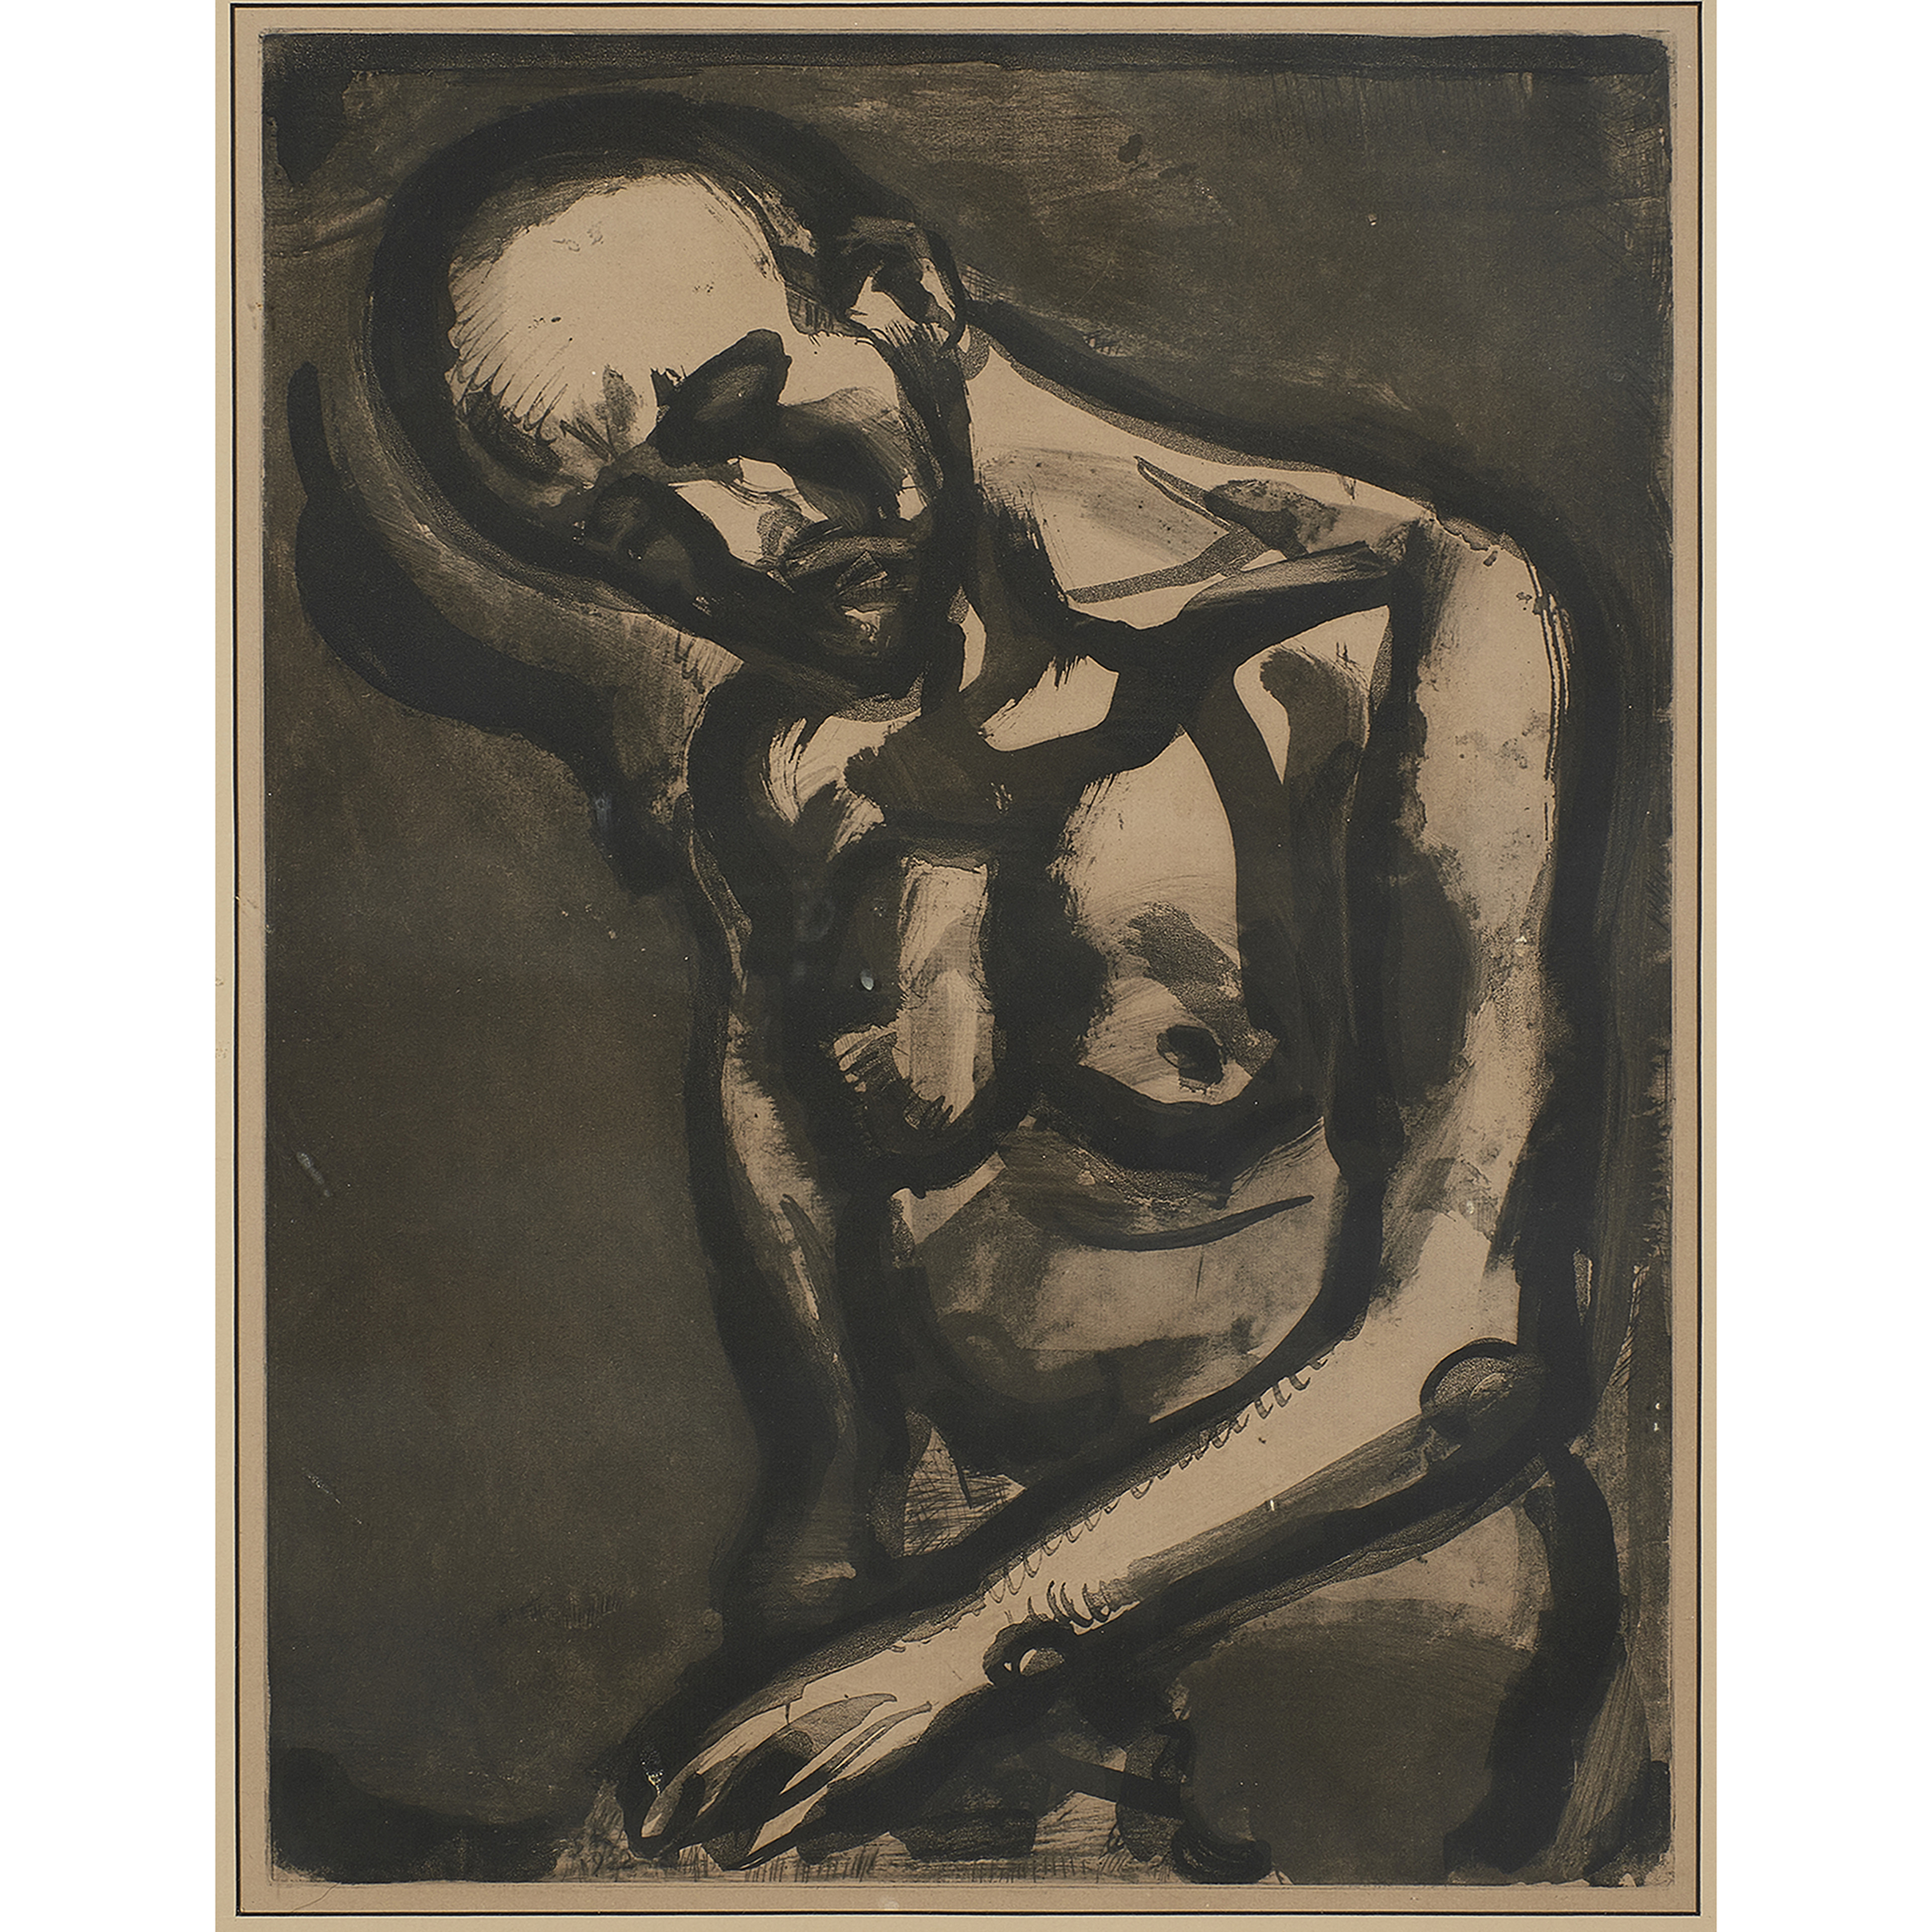 PRINT GEORGES ROUAULT Georges 3a6476